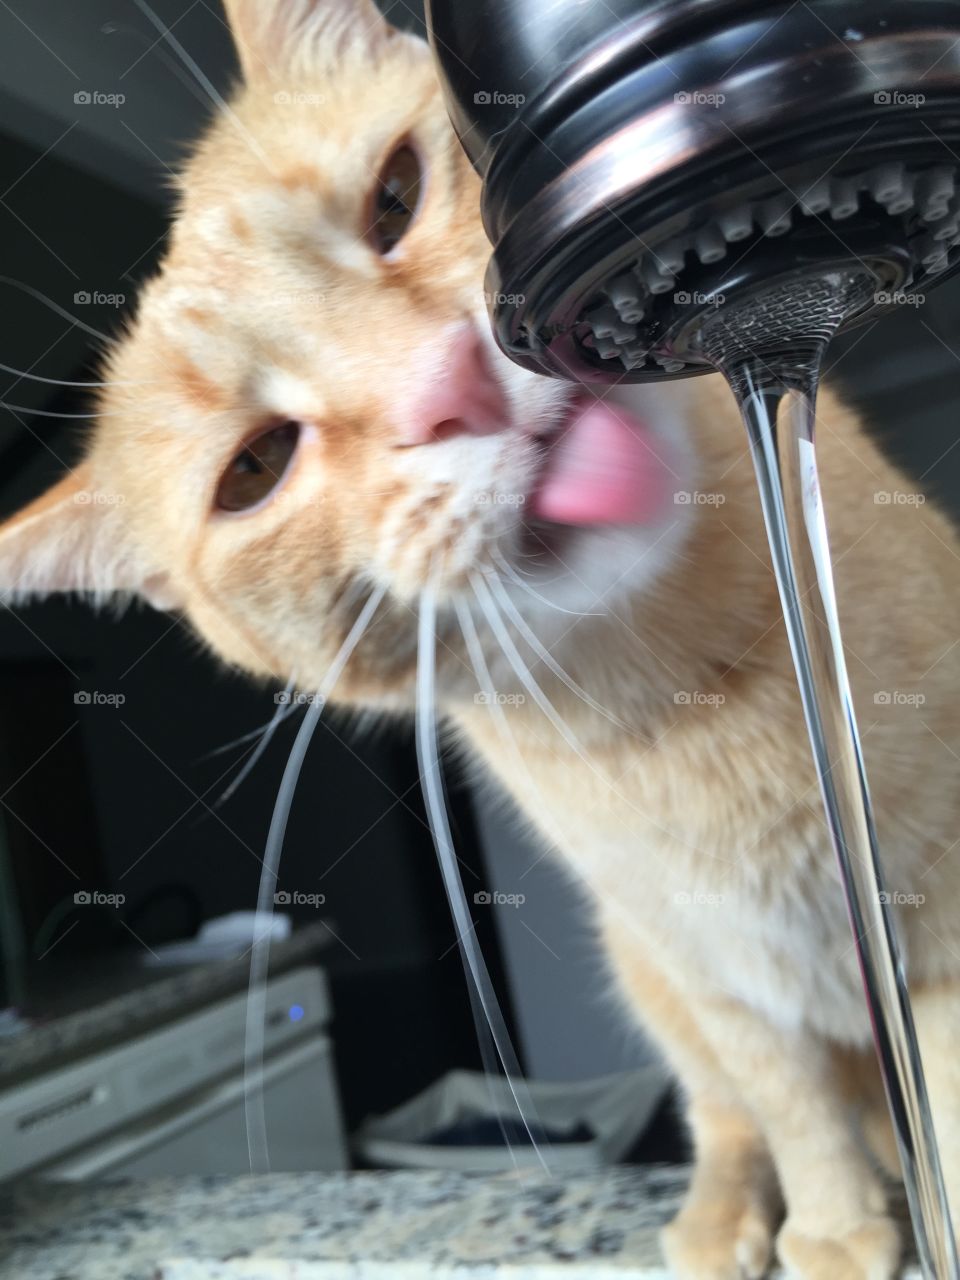 Thirst . Cat drinking from faucet